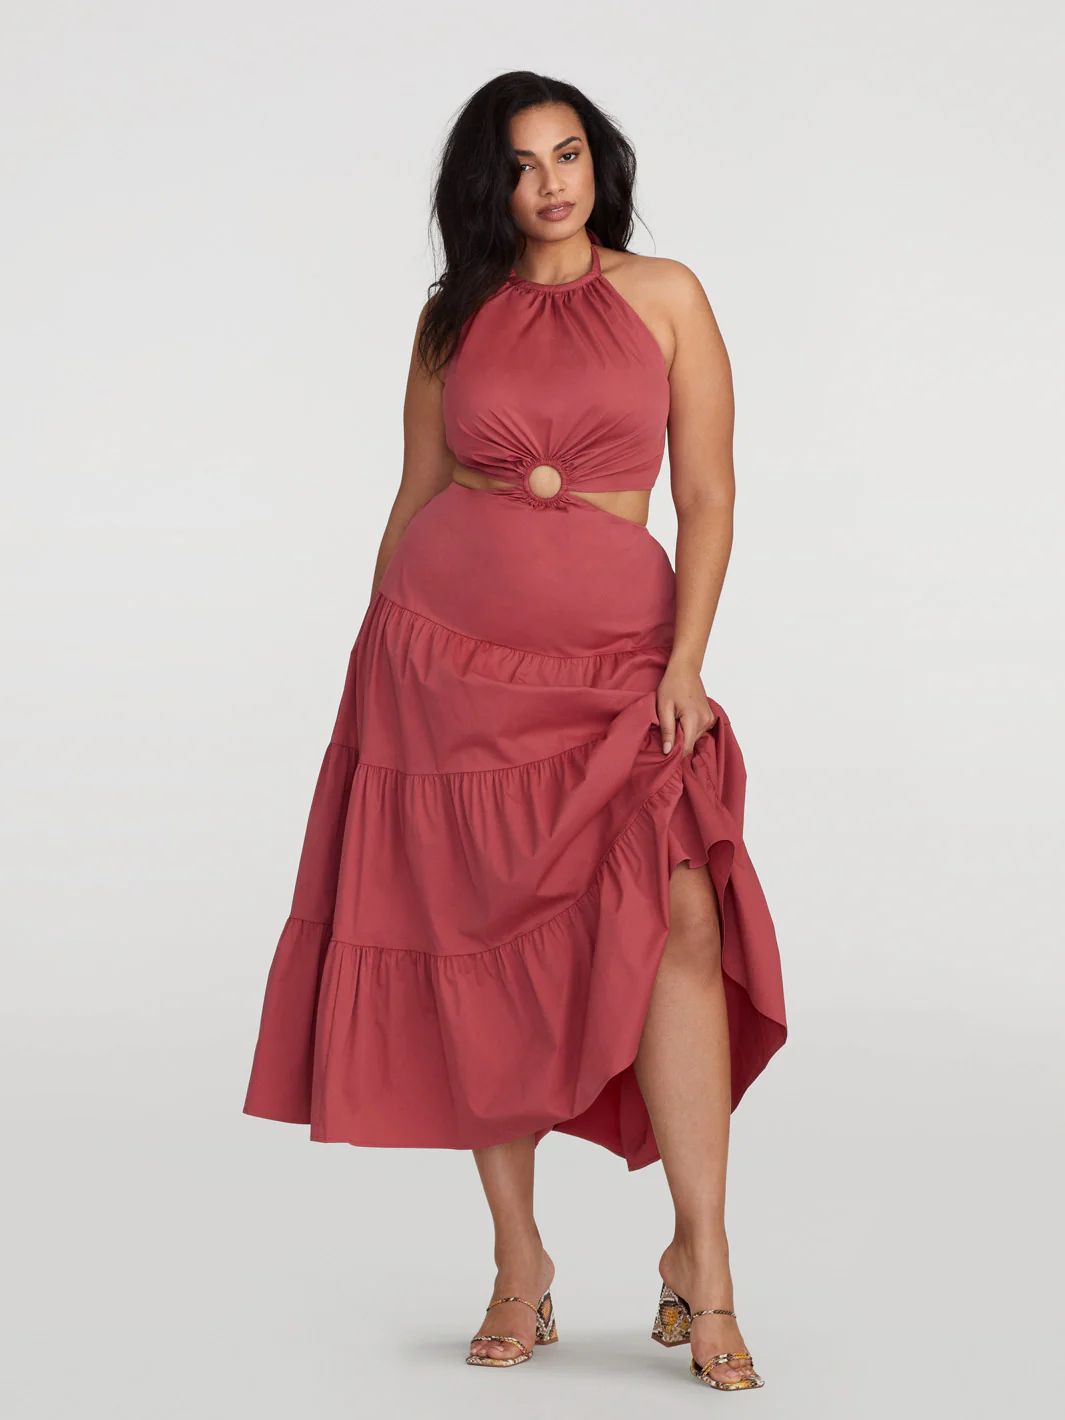 Gabrielle Union Women's Keyhole Cutout Tiered Maxi Dress in Dark Pink 4 Lord & Taylor | Lord & Taylor